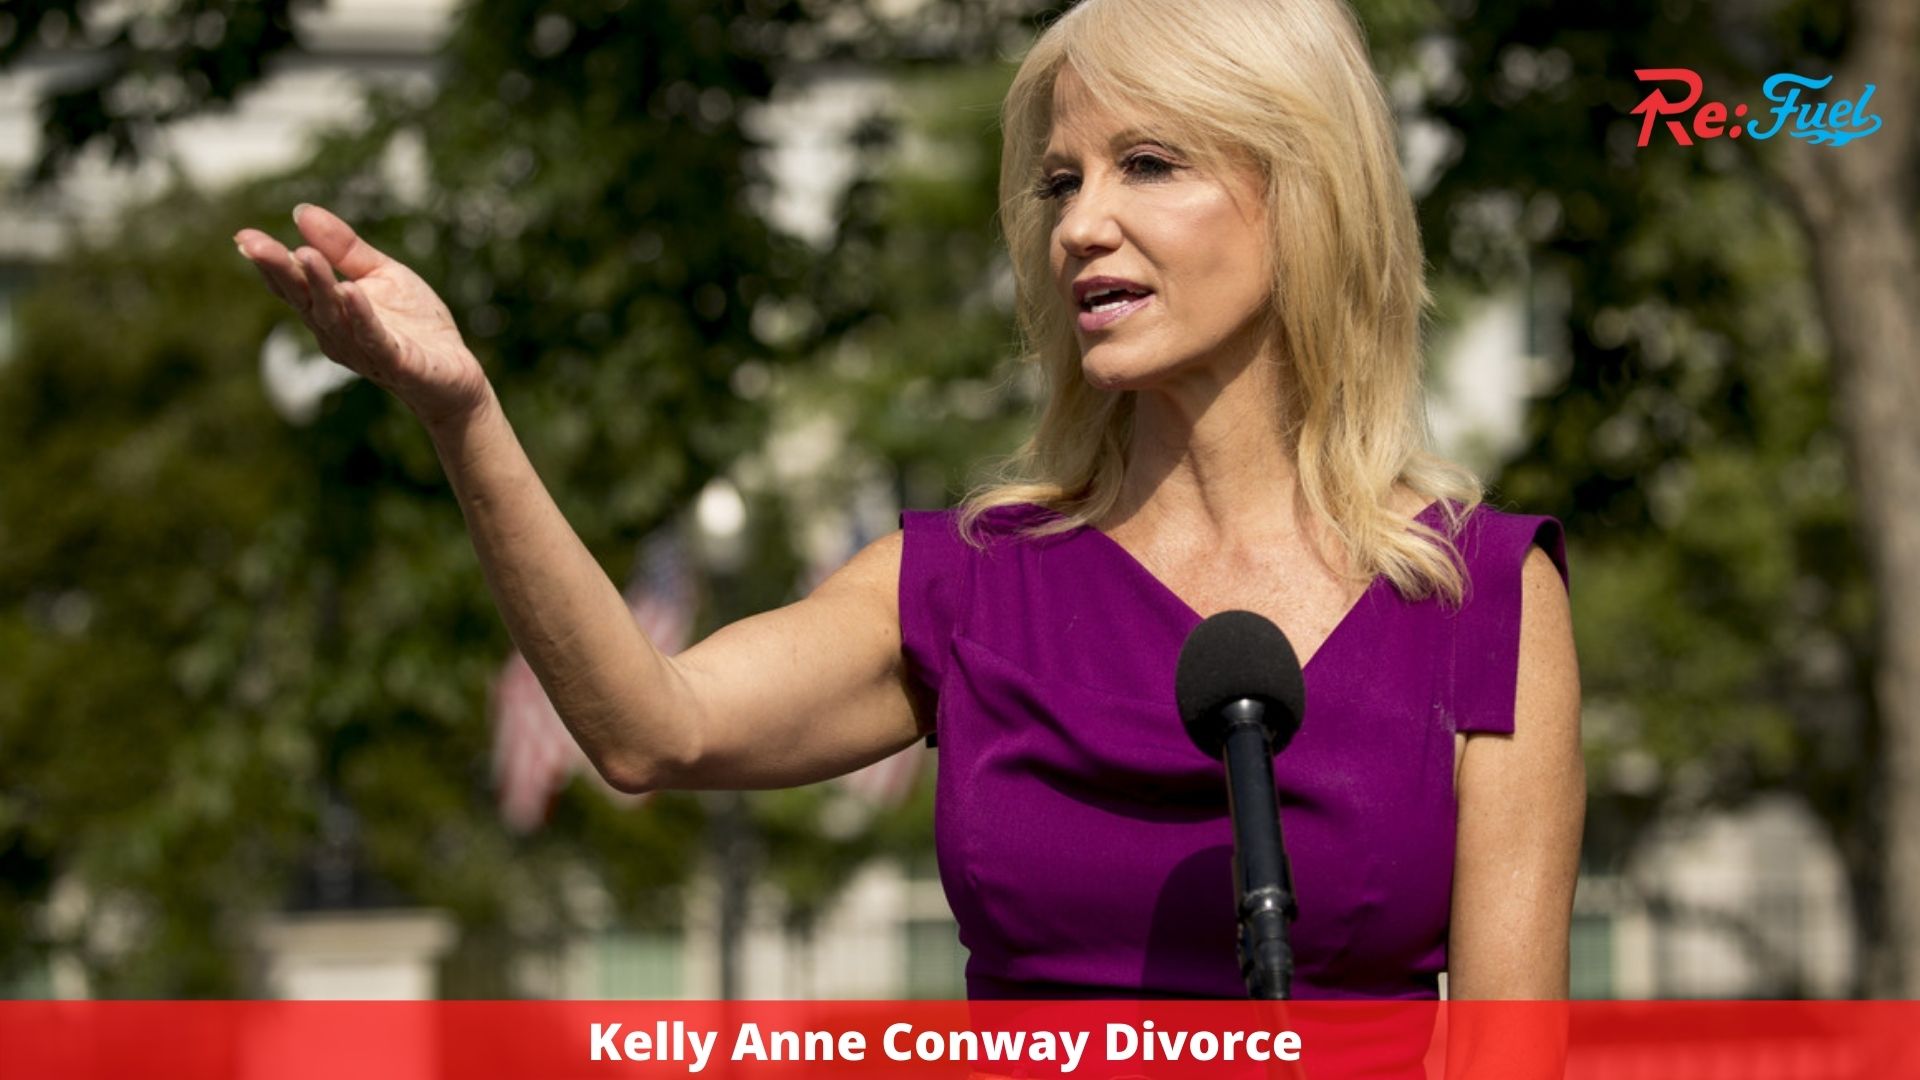 Kelly Anne Conway Divorce - Complete Info!